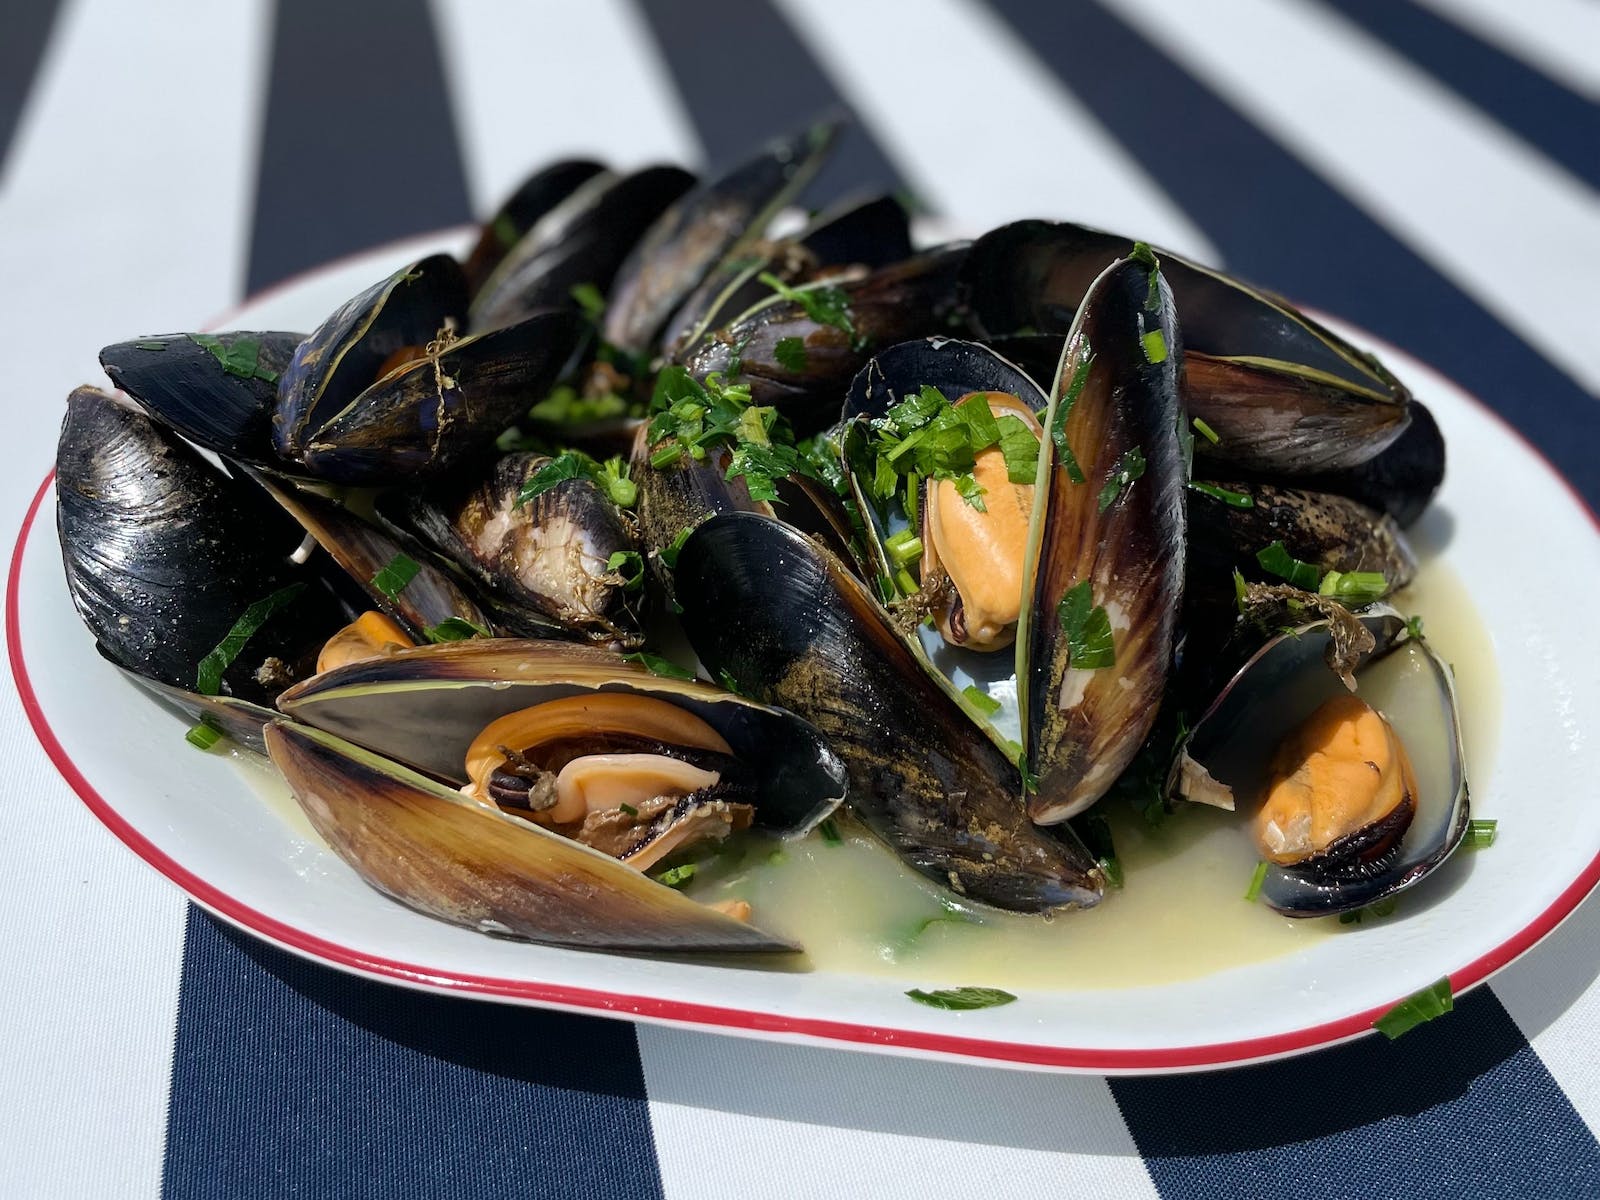 A plate of freshly cooked mussels.